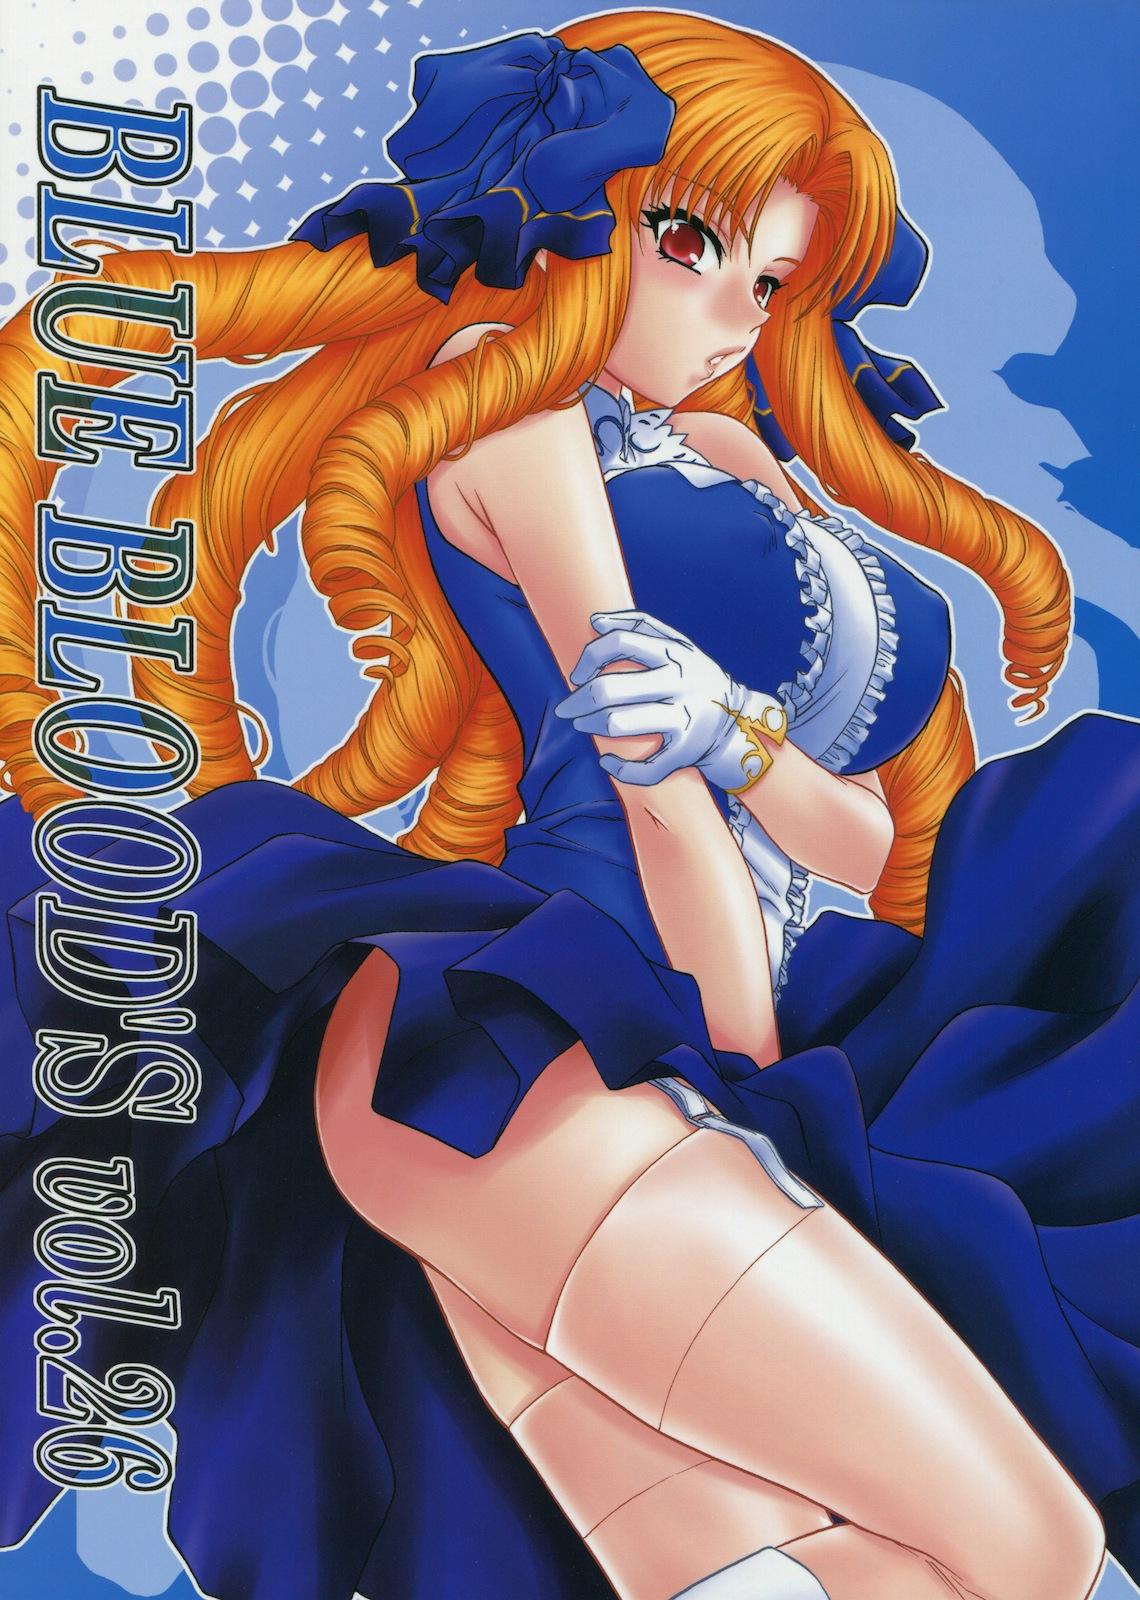 Foursome BLUE BLOOD'S vol.26 - Fate hollow ataraxia Nena - Page 2